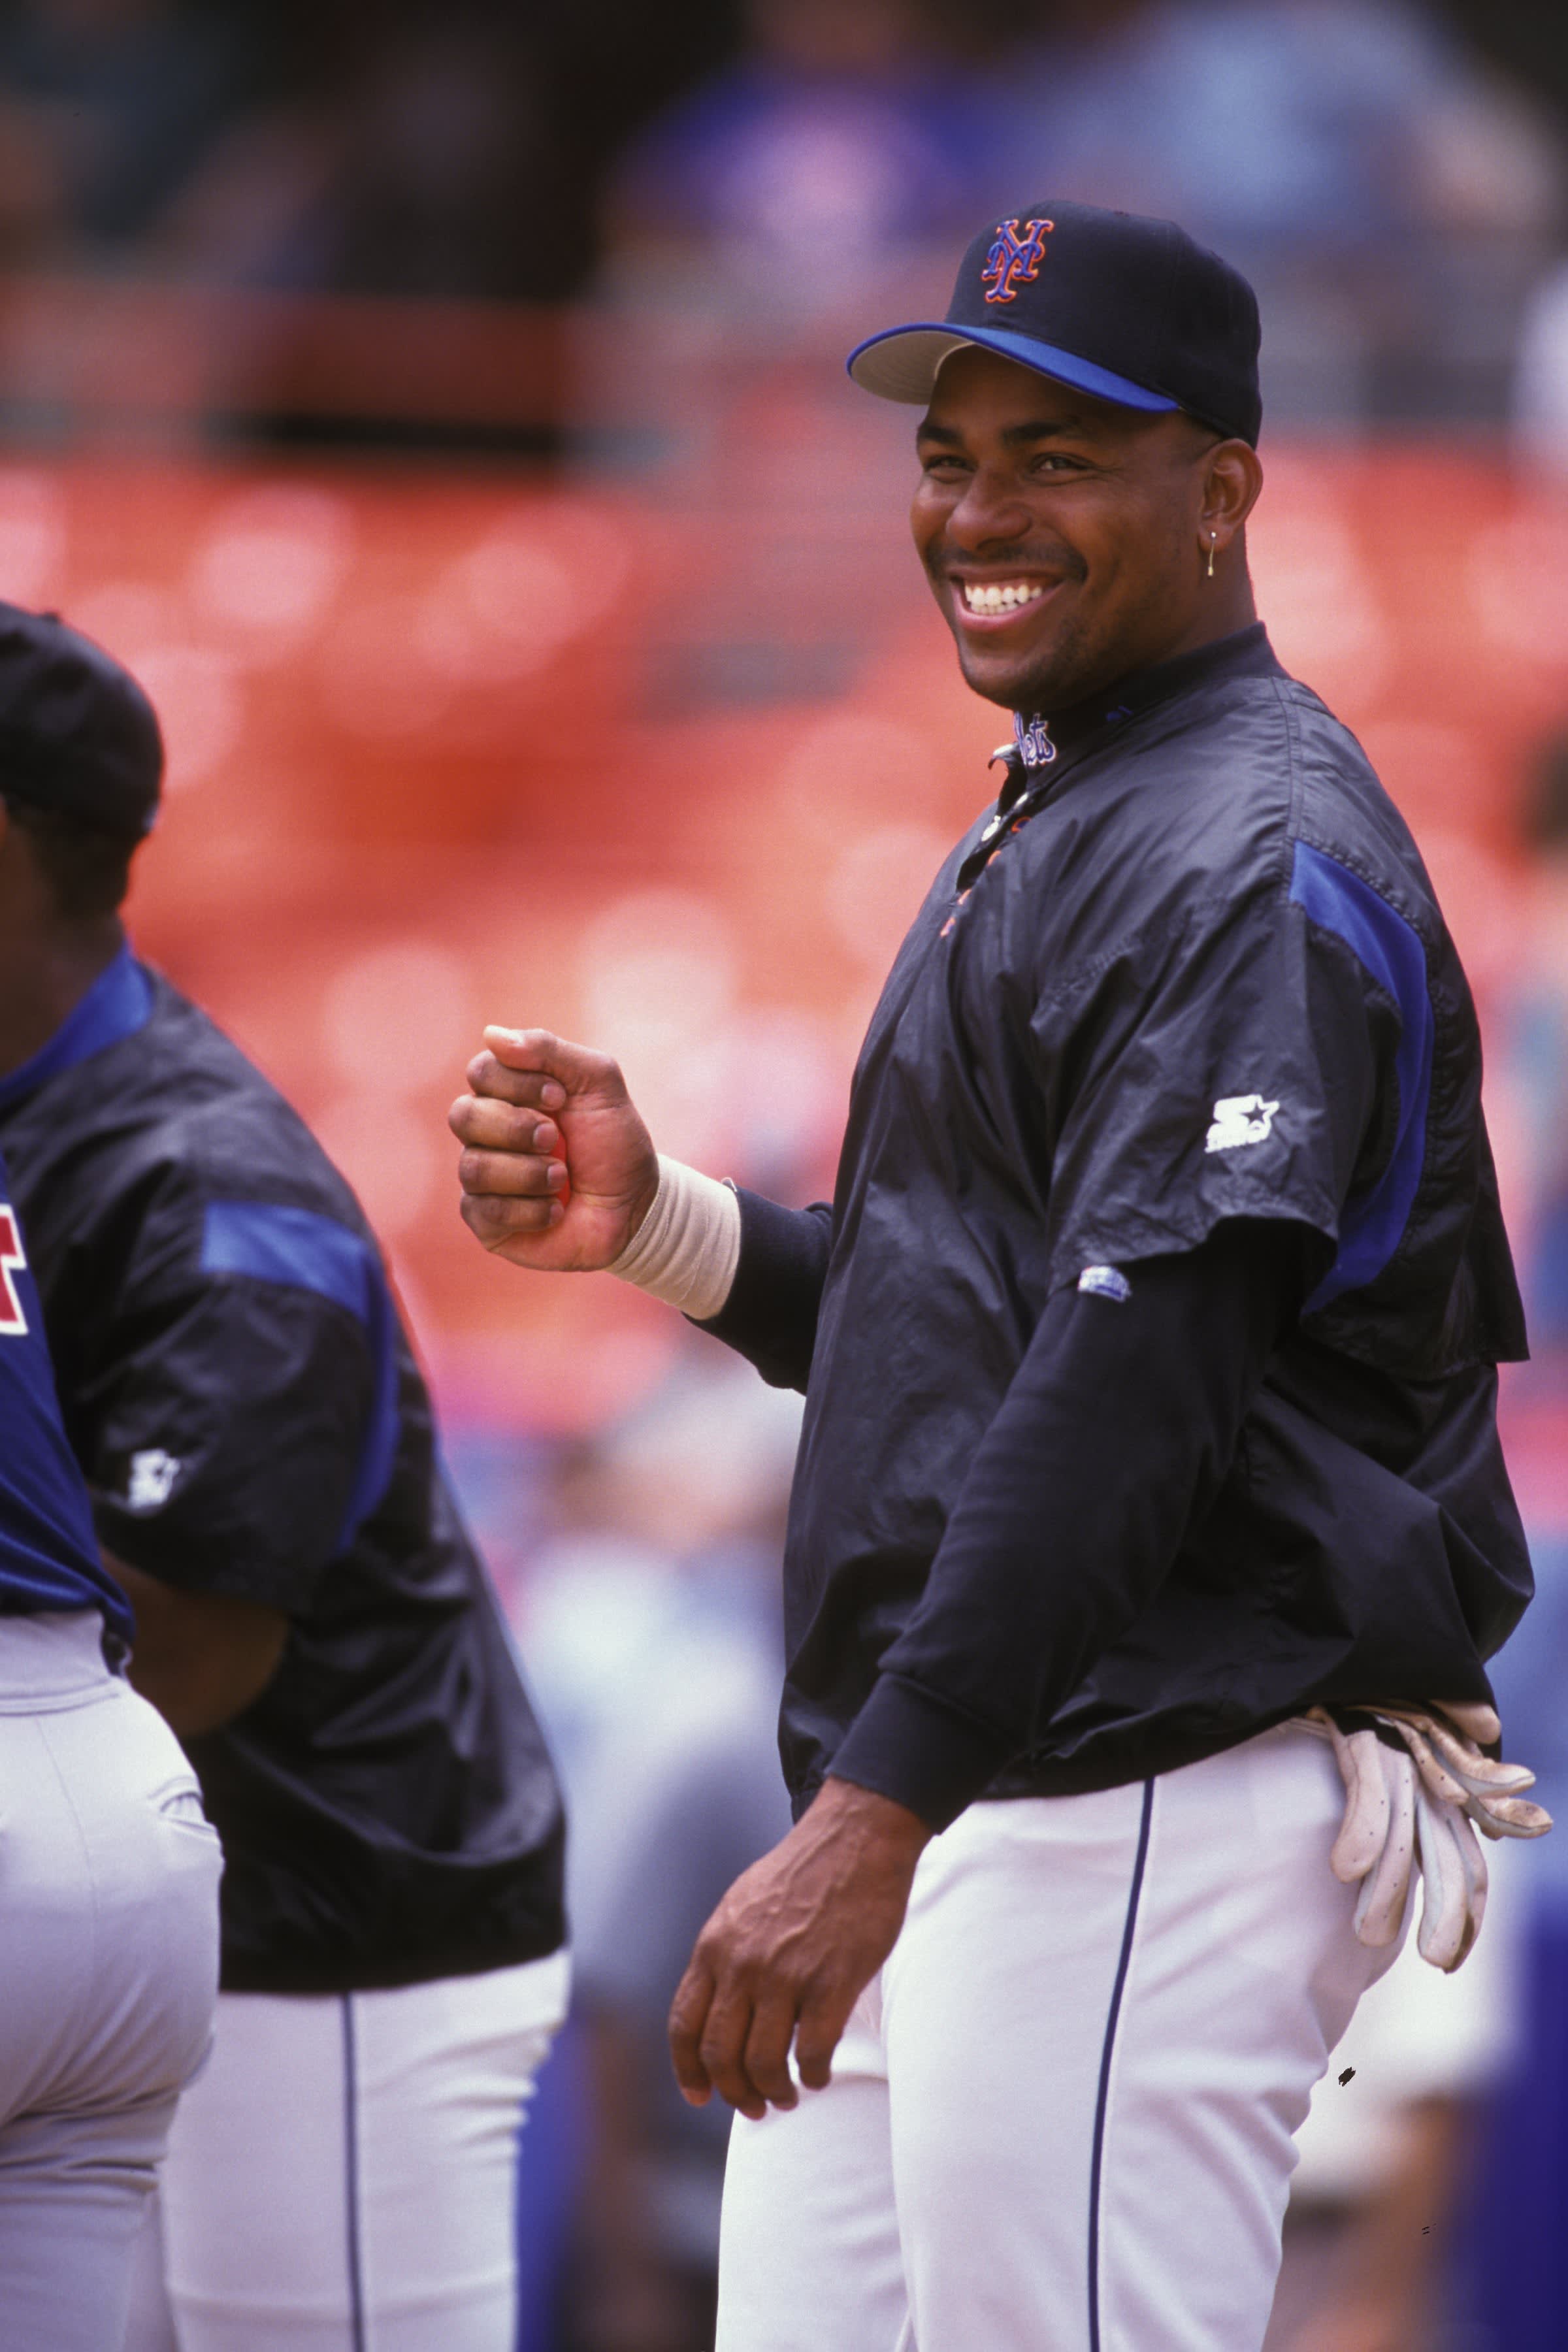 Bobby Bonilla Day: Why his deal with the Mets was so lucrative